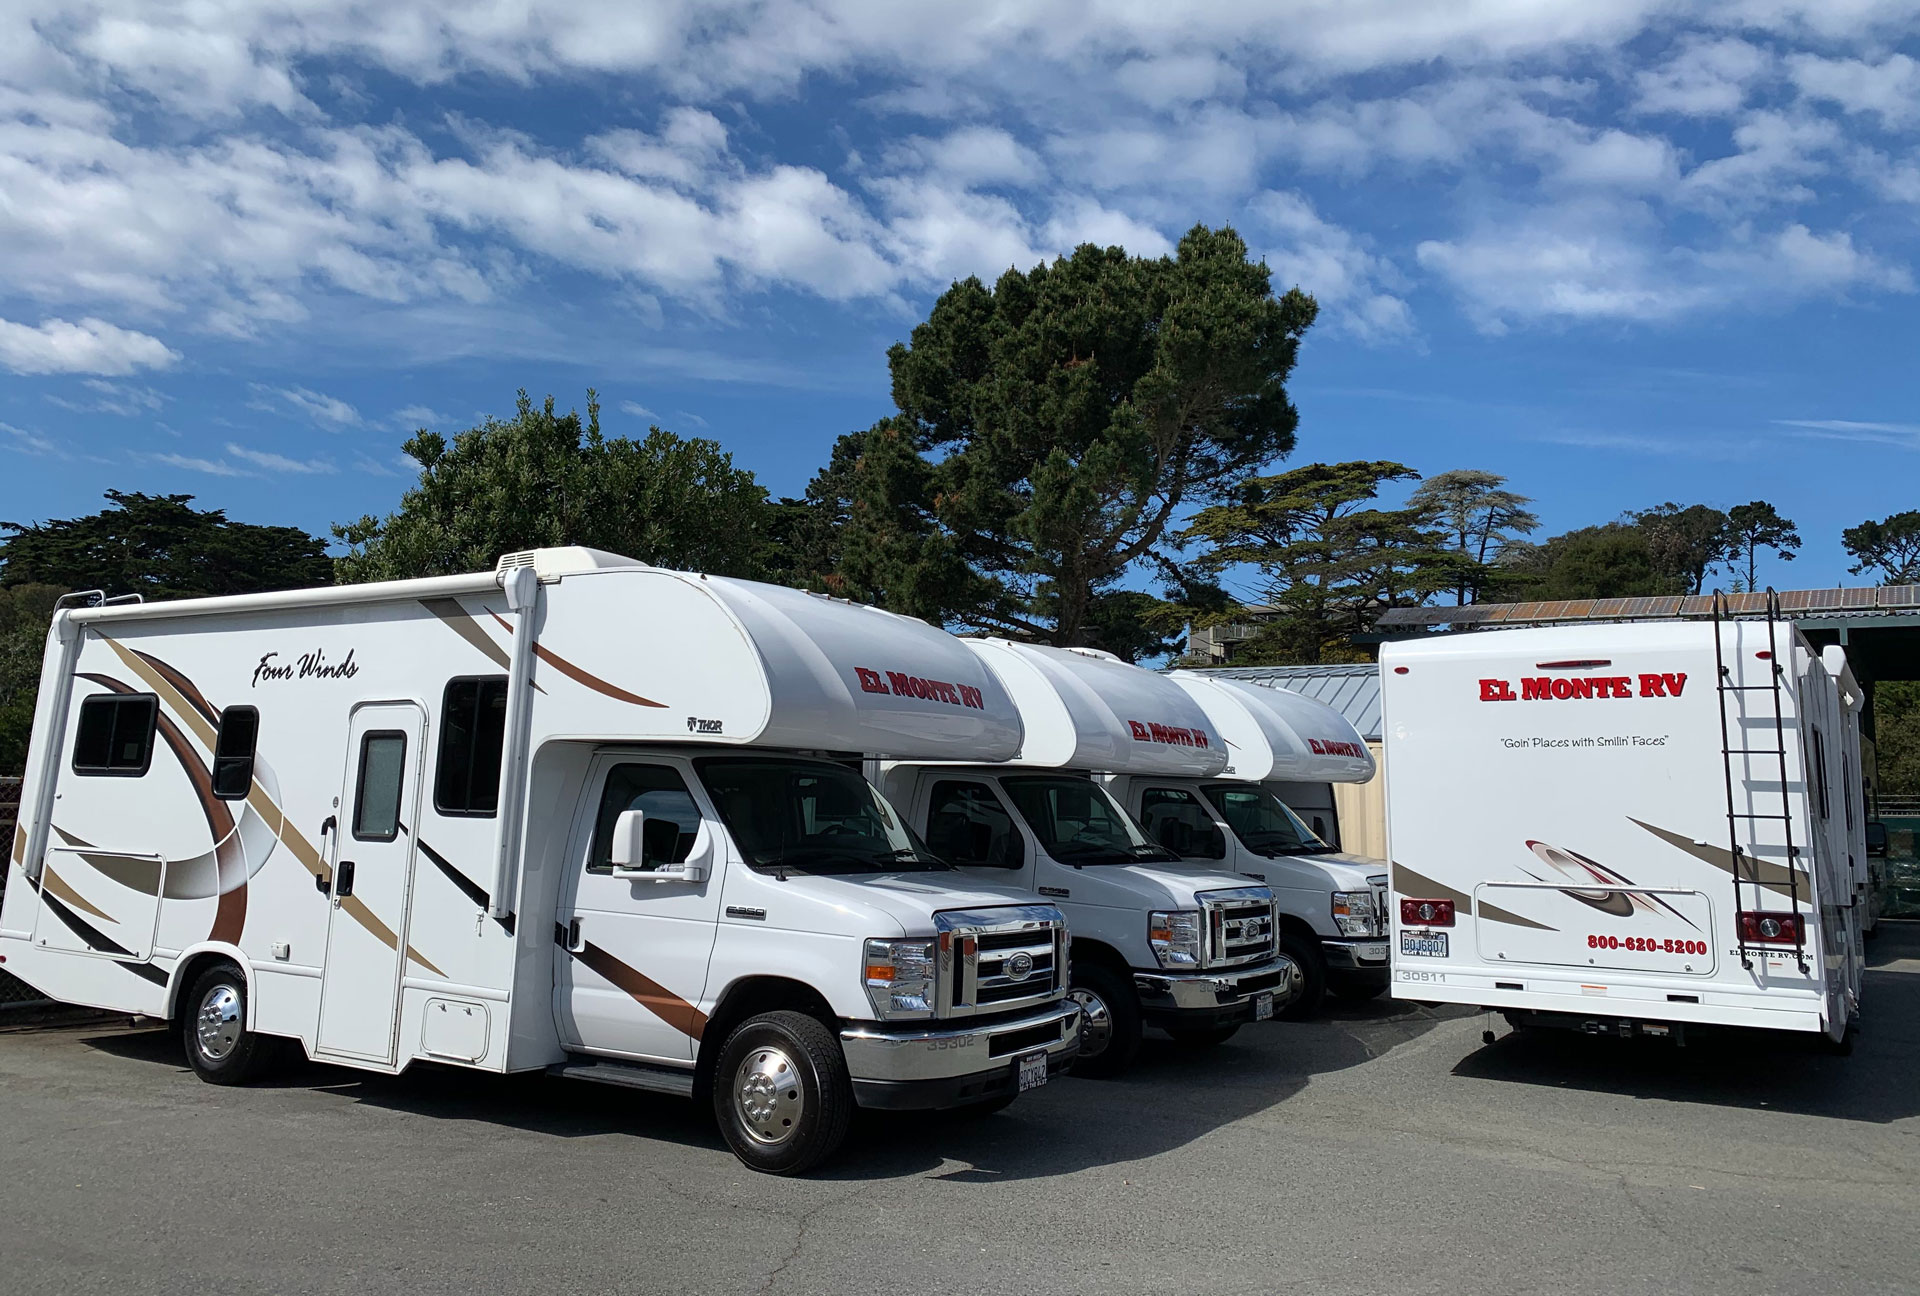 San Francisco is staging 30 RVs at the Presidio in case it needs to use them to isolate individuals with COVID-19 who don’t have places to self-isolate, including people experiencing homelessness, people who live in residential hotels or those who live in group homes.